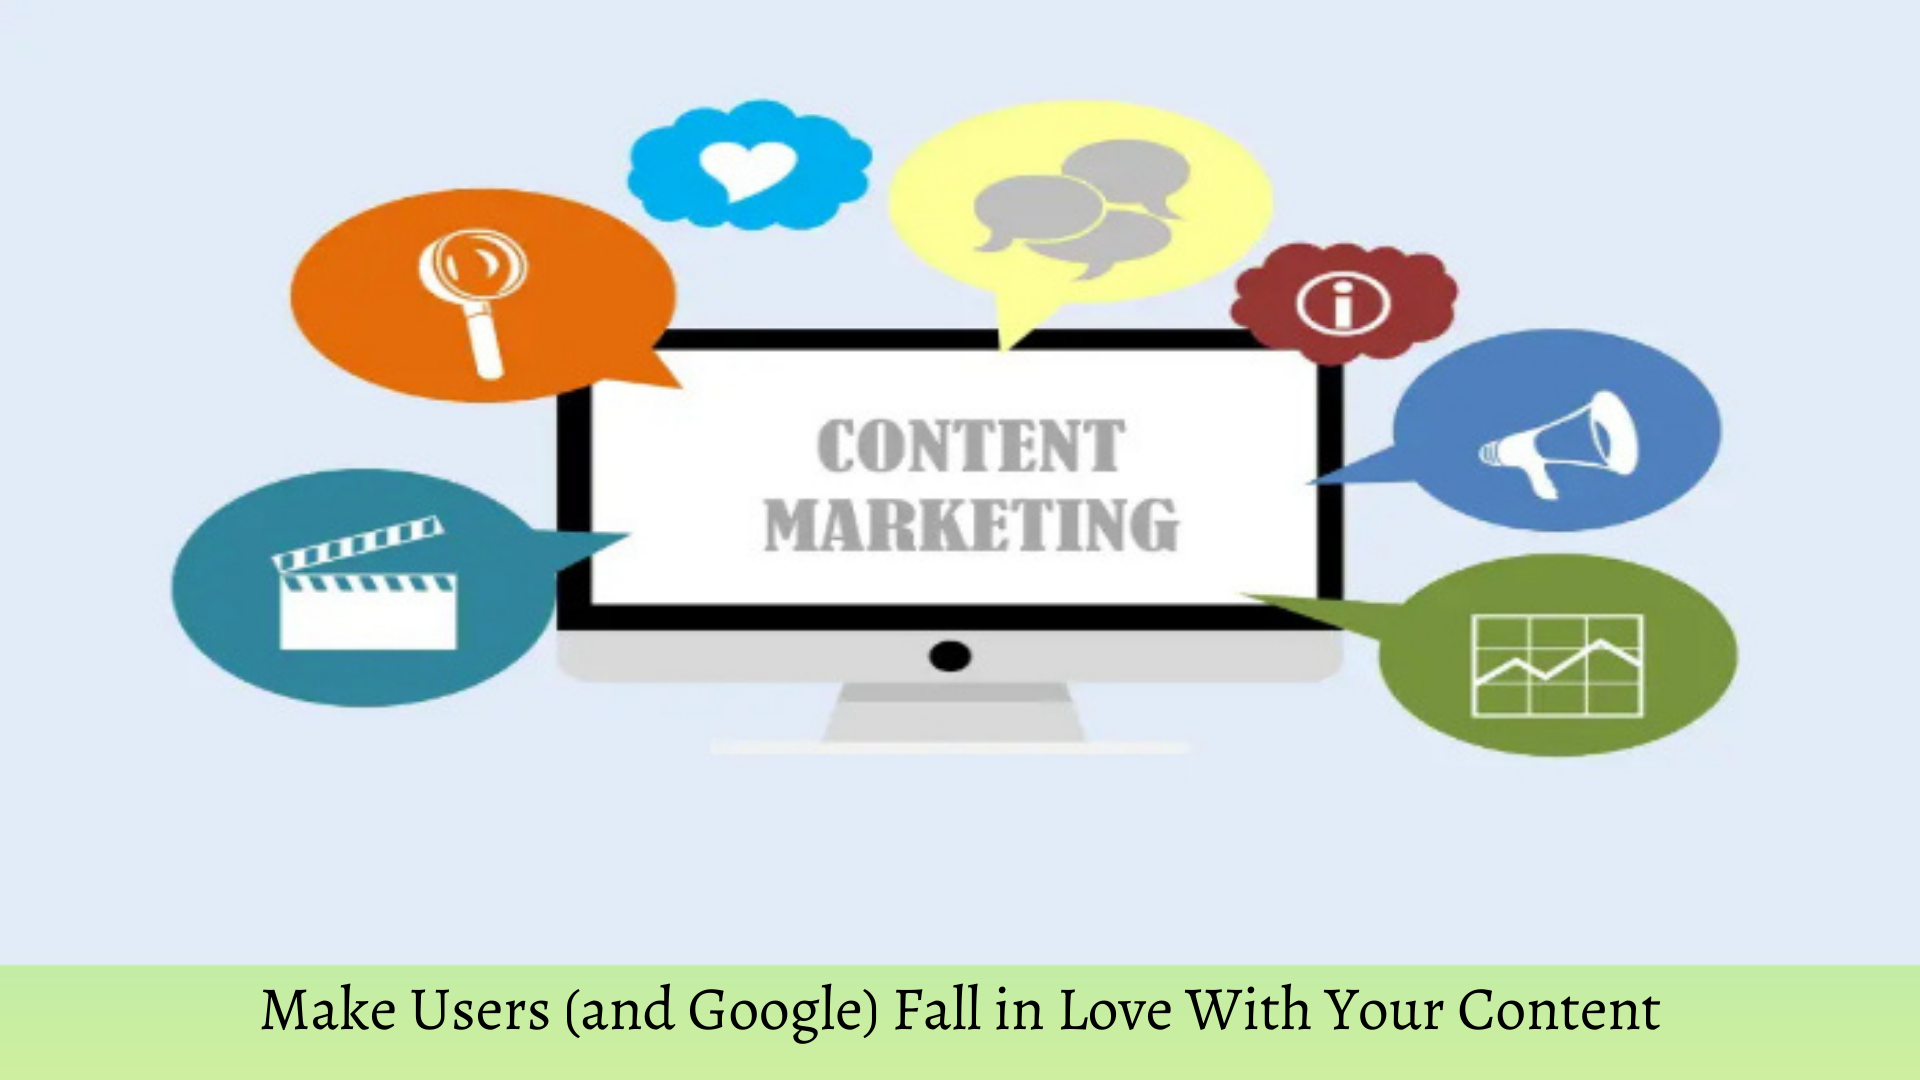 Make Users (and Google) Fall in Love With Your Content